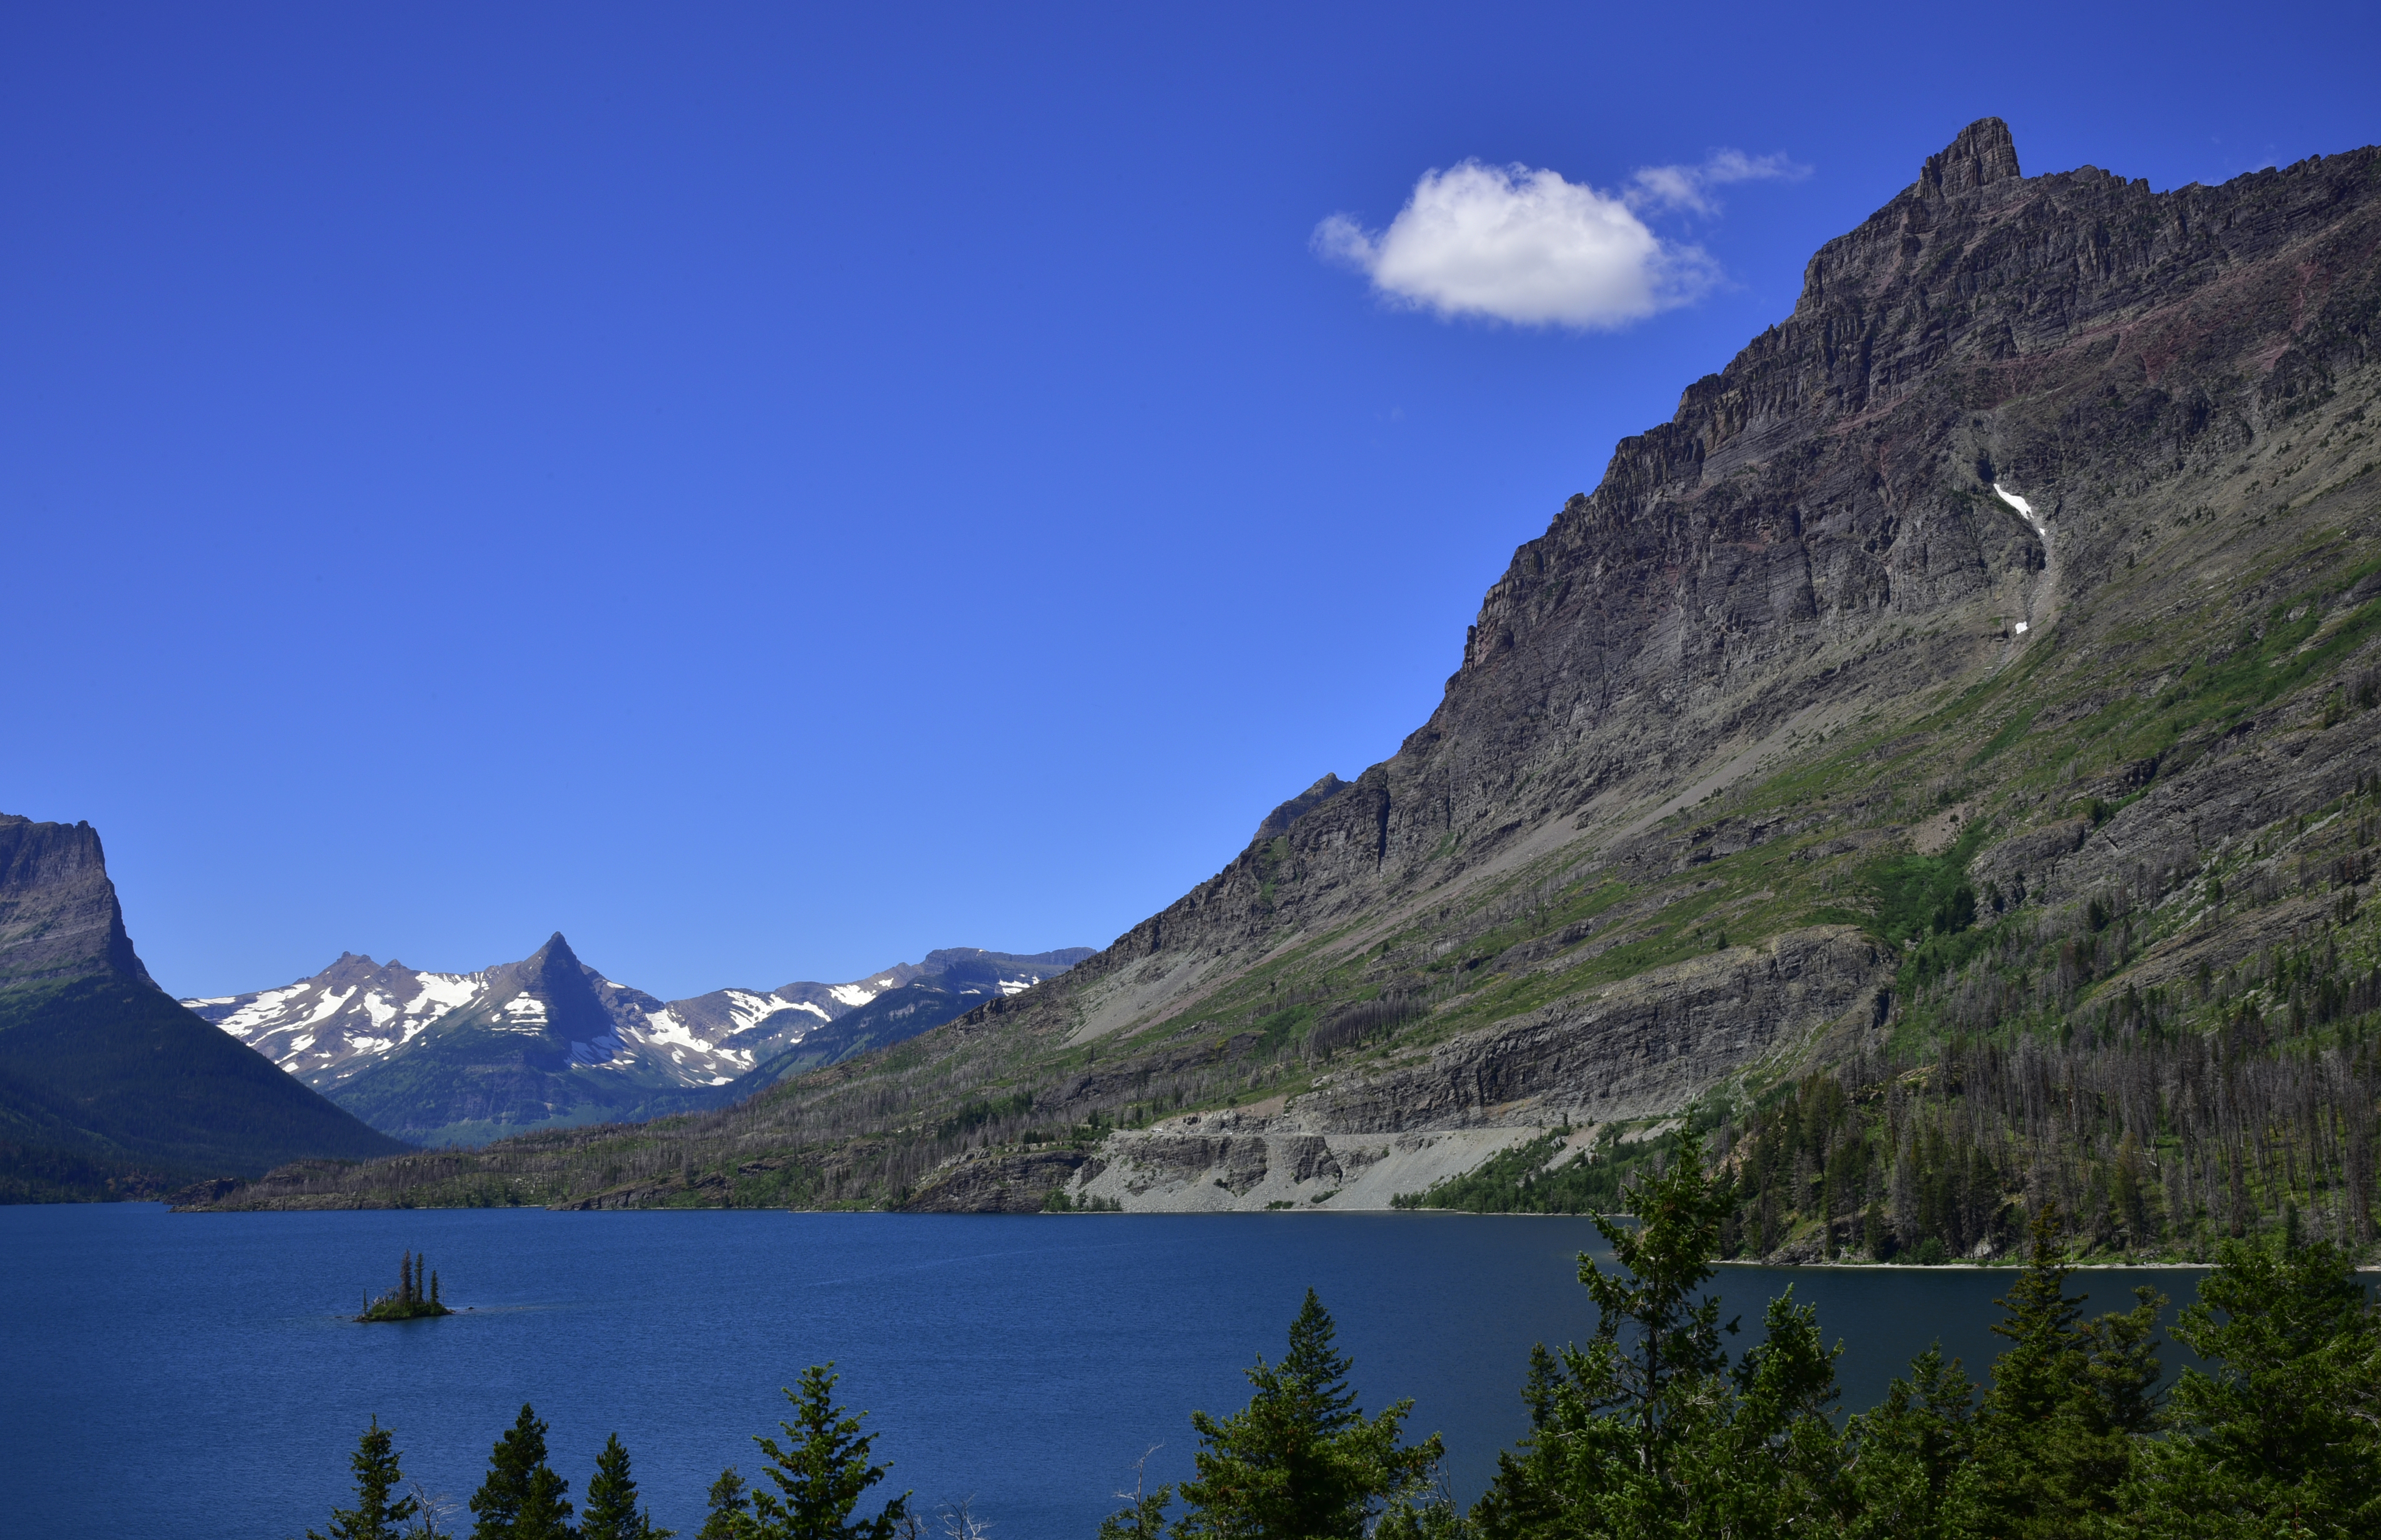 View from Wild Goose Island Overlook  -  Going-to-the-Sun Road, Glacier National Park, Montana